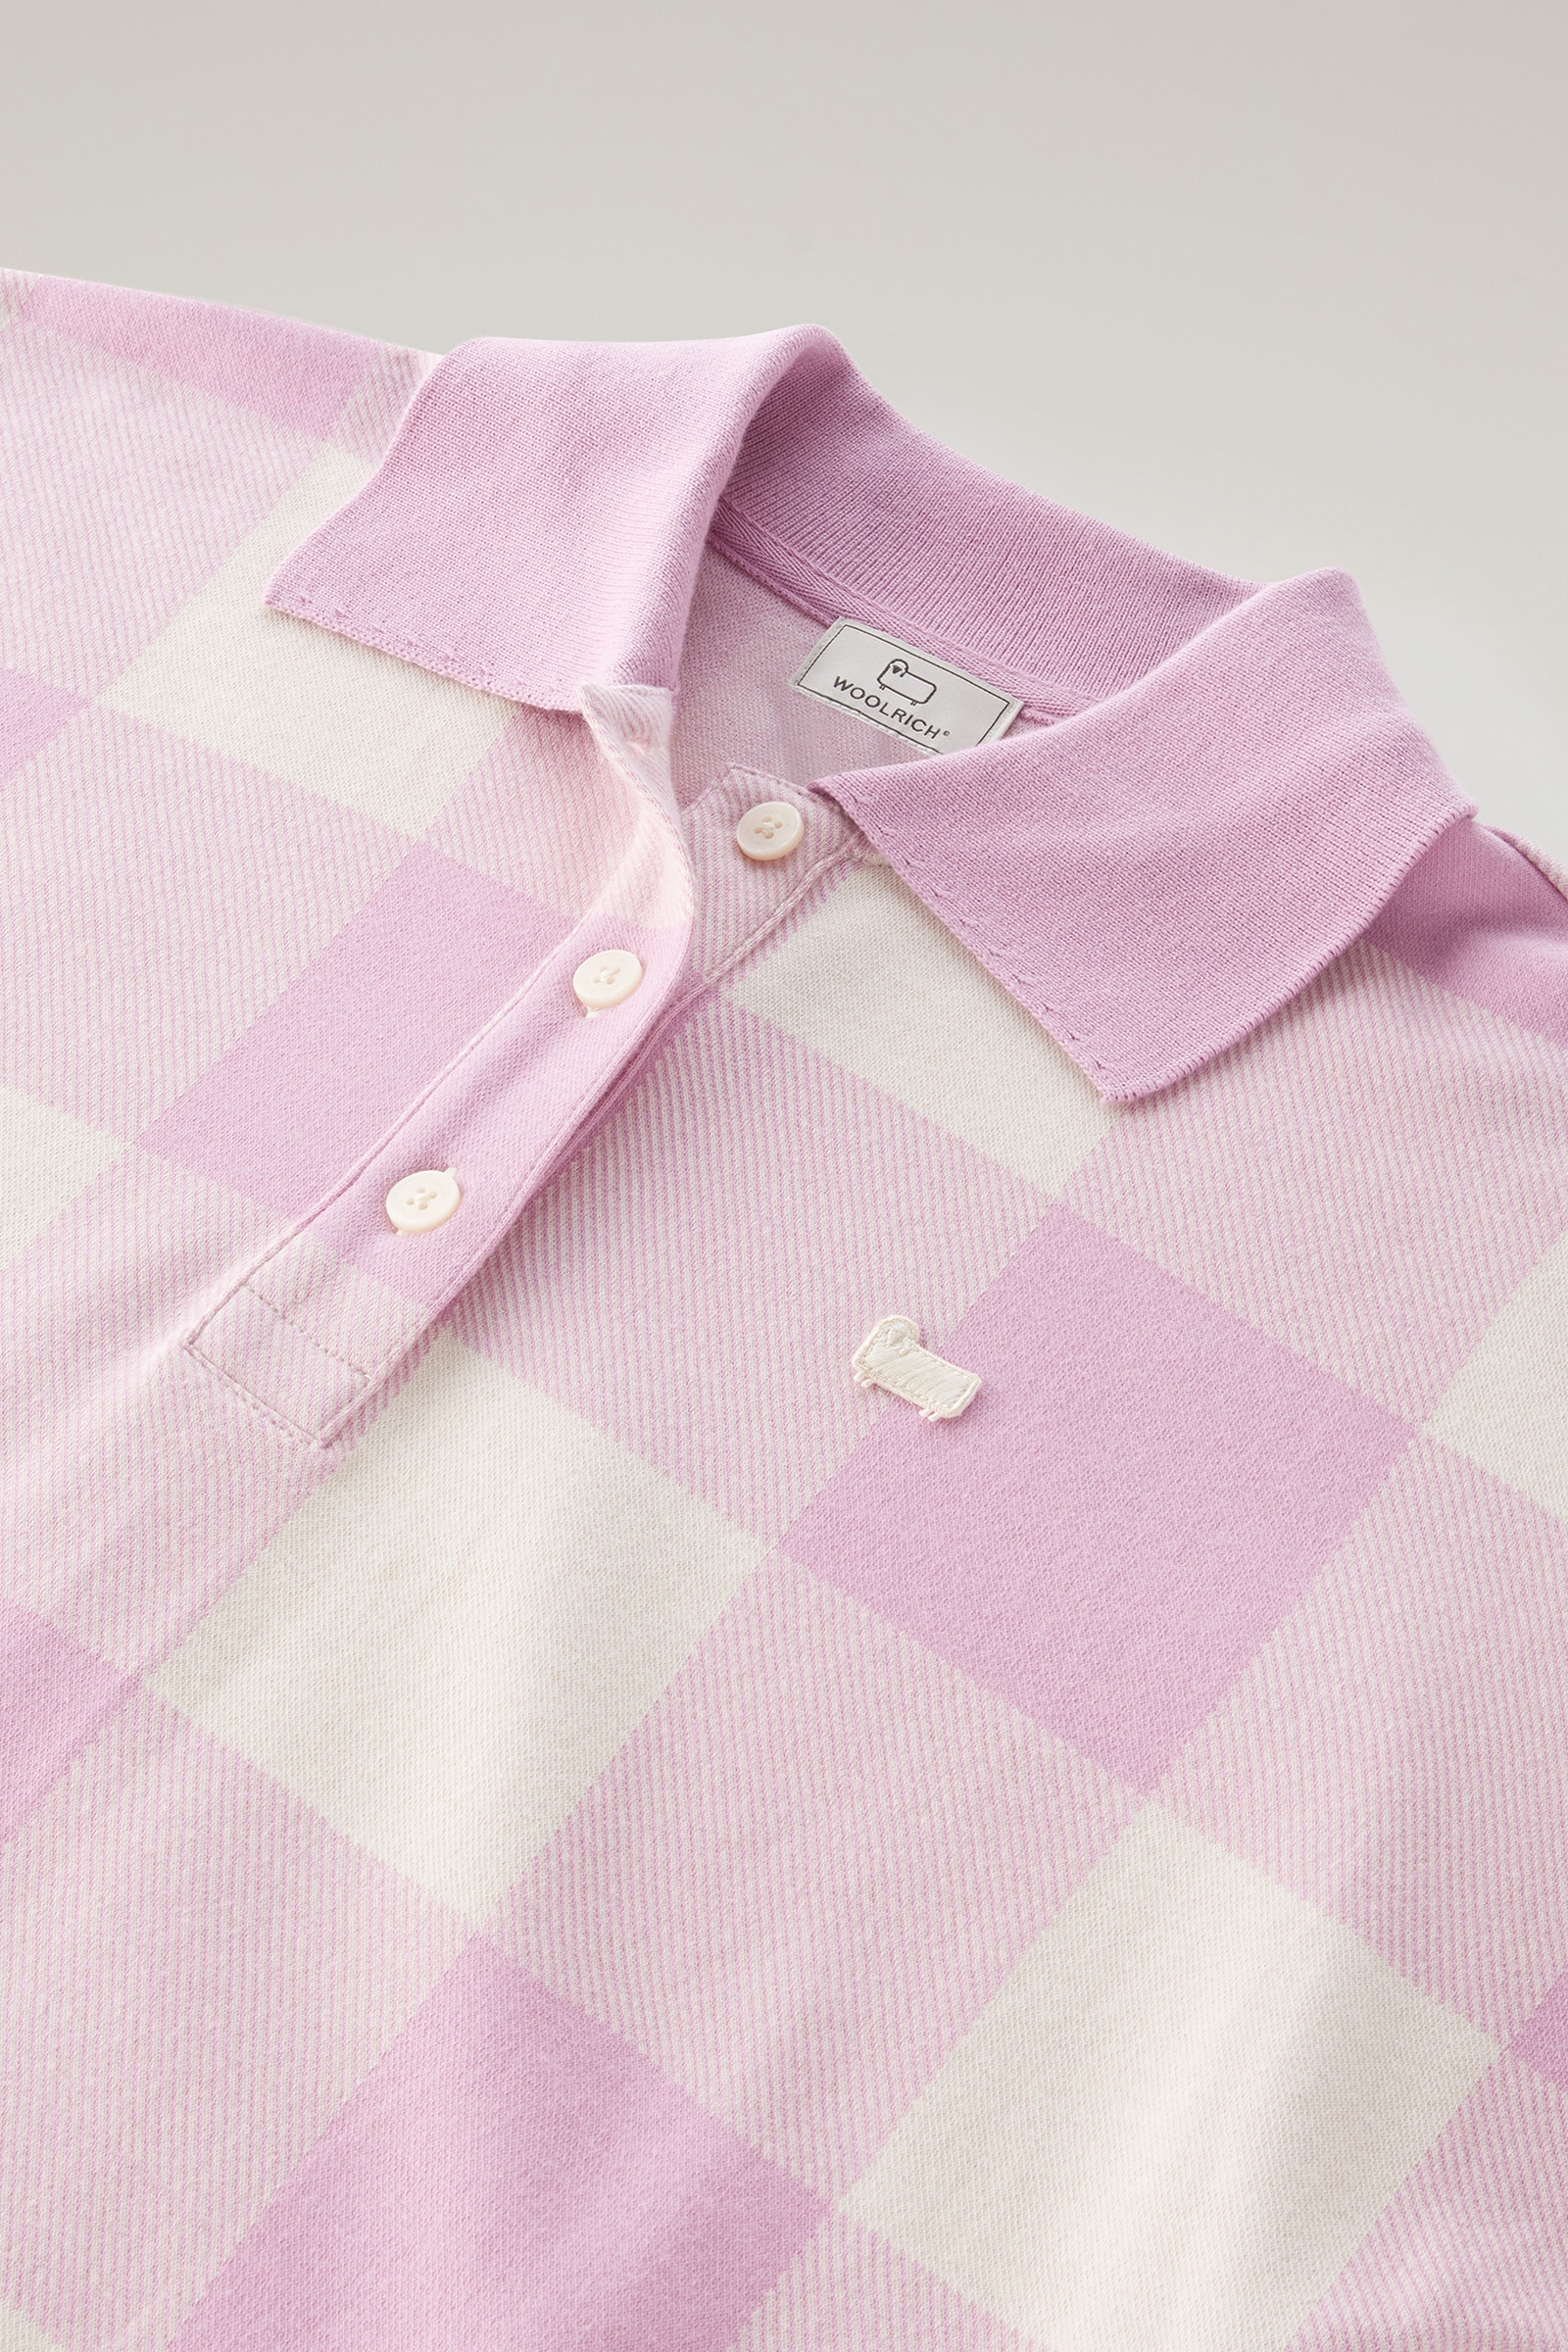 Women's American Check Polo in Yarn-Dyed Stretch Cotton Blend Pink ...